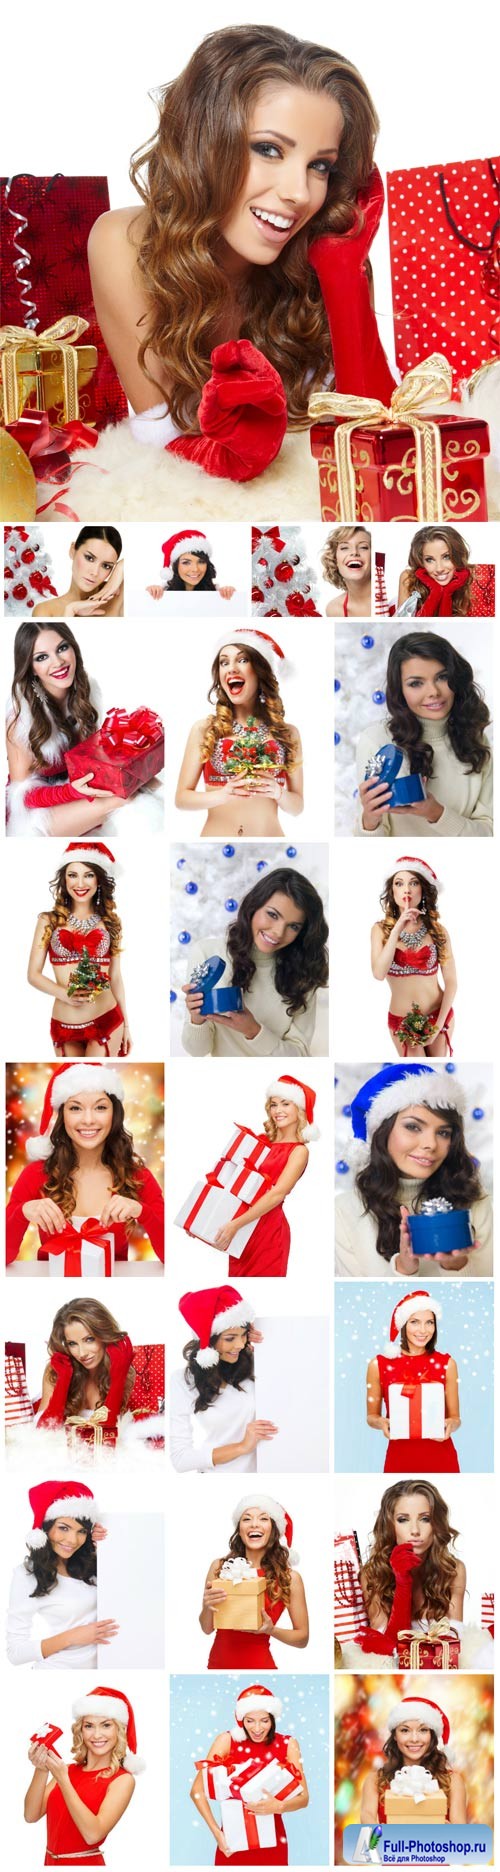 New Year and Christmas stock photos 34